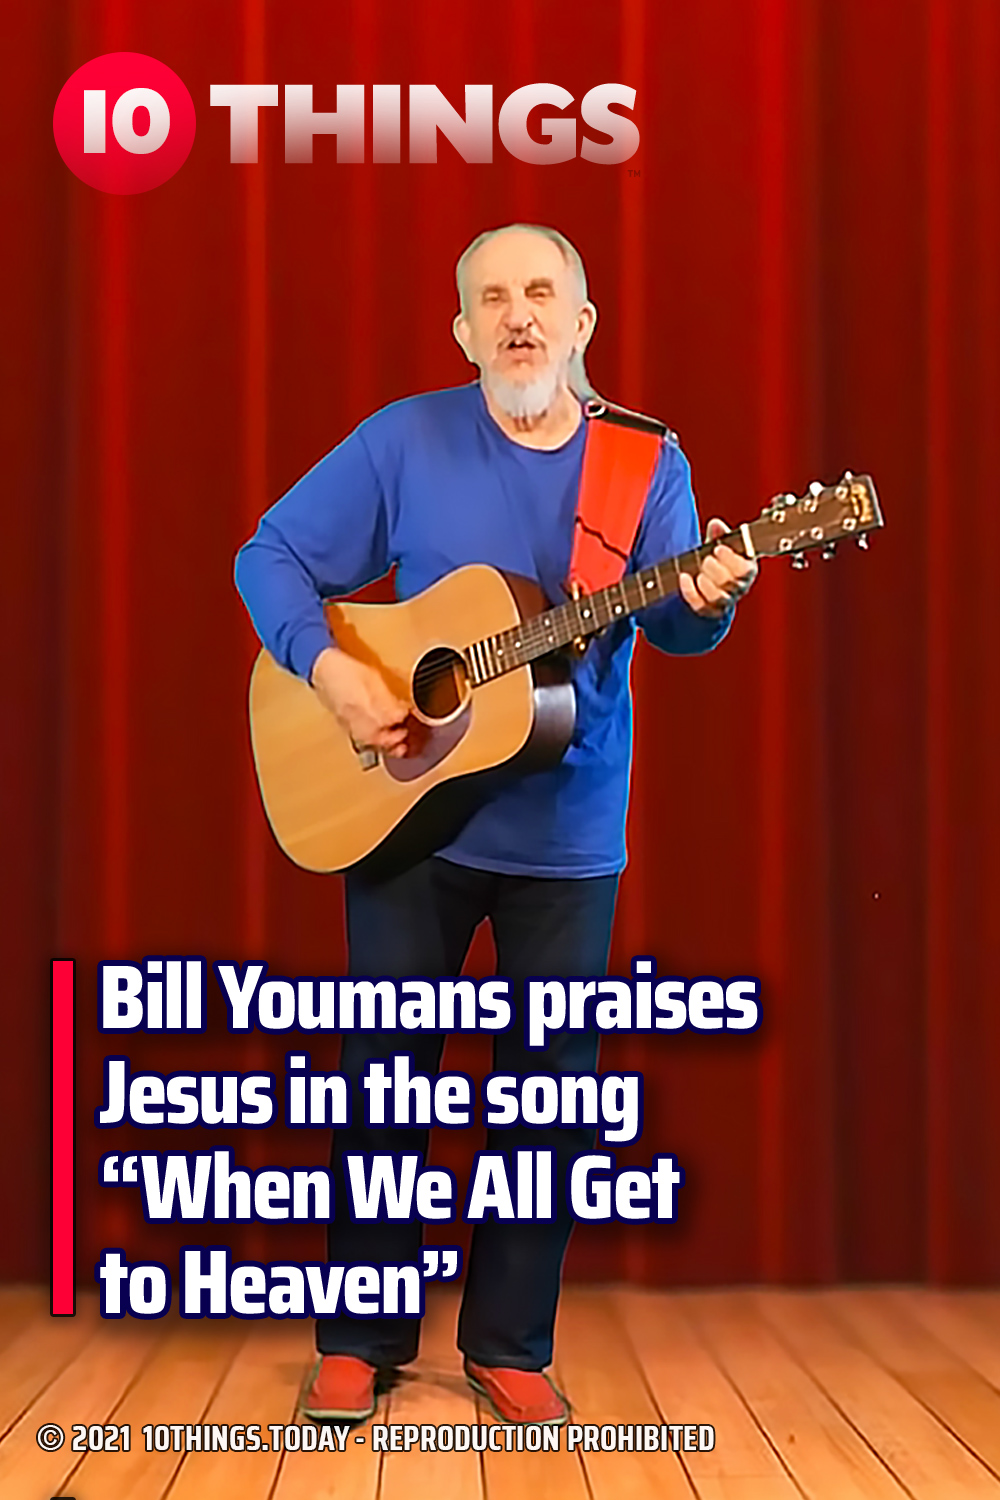 Bill Youmans praises Jesus in the song “When We All Get to Heaven”